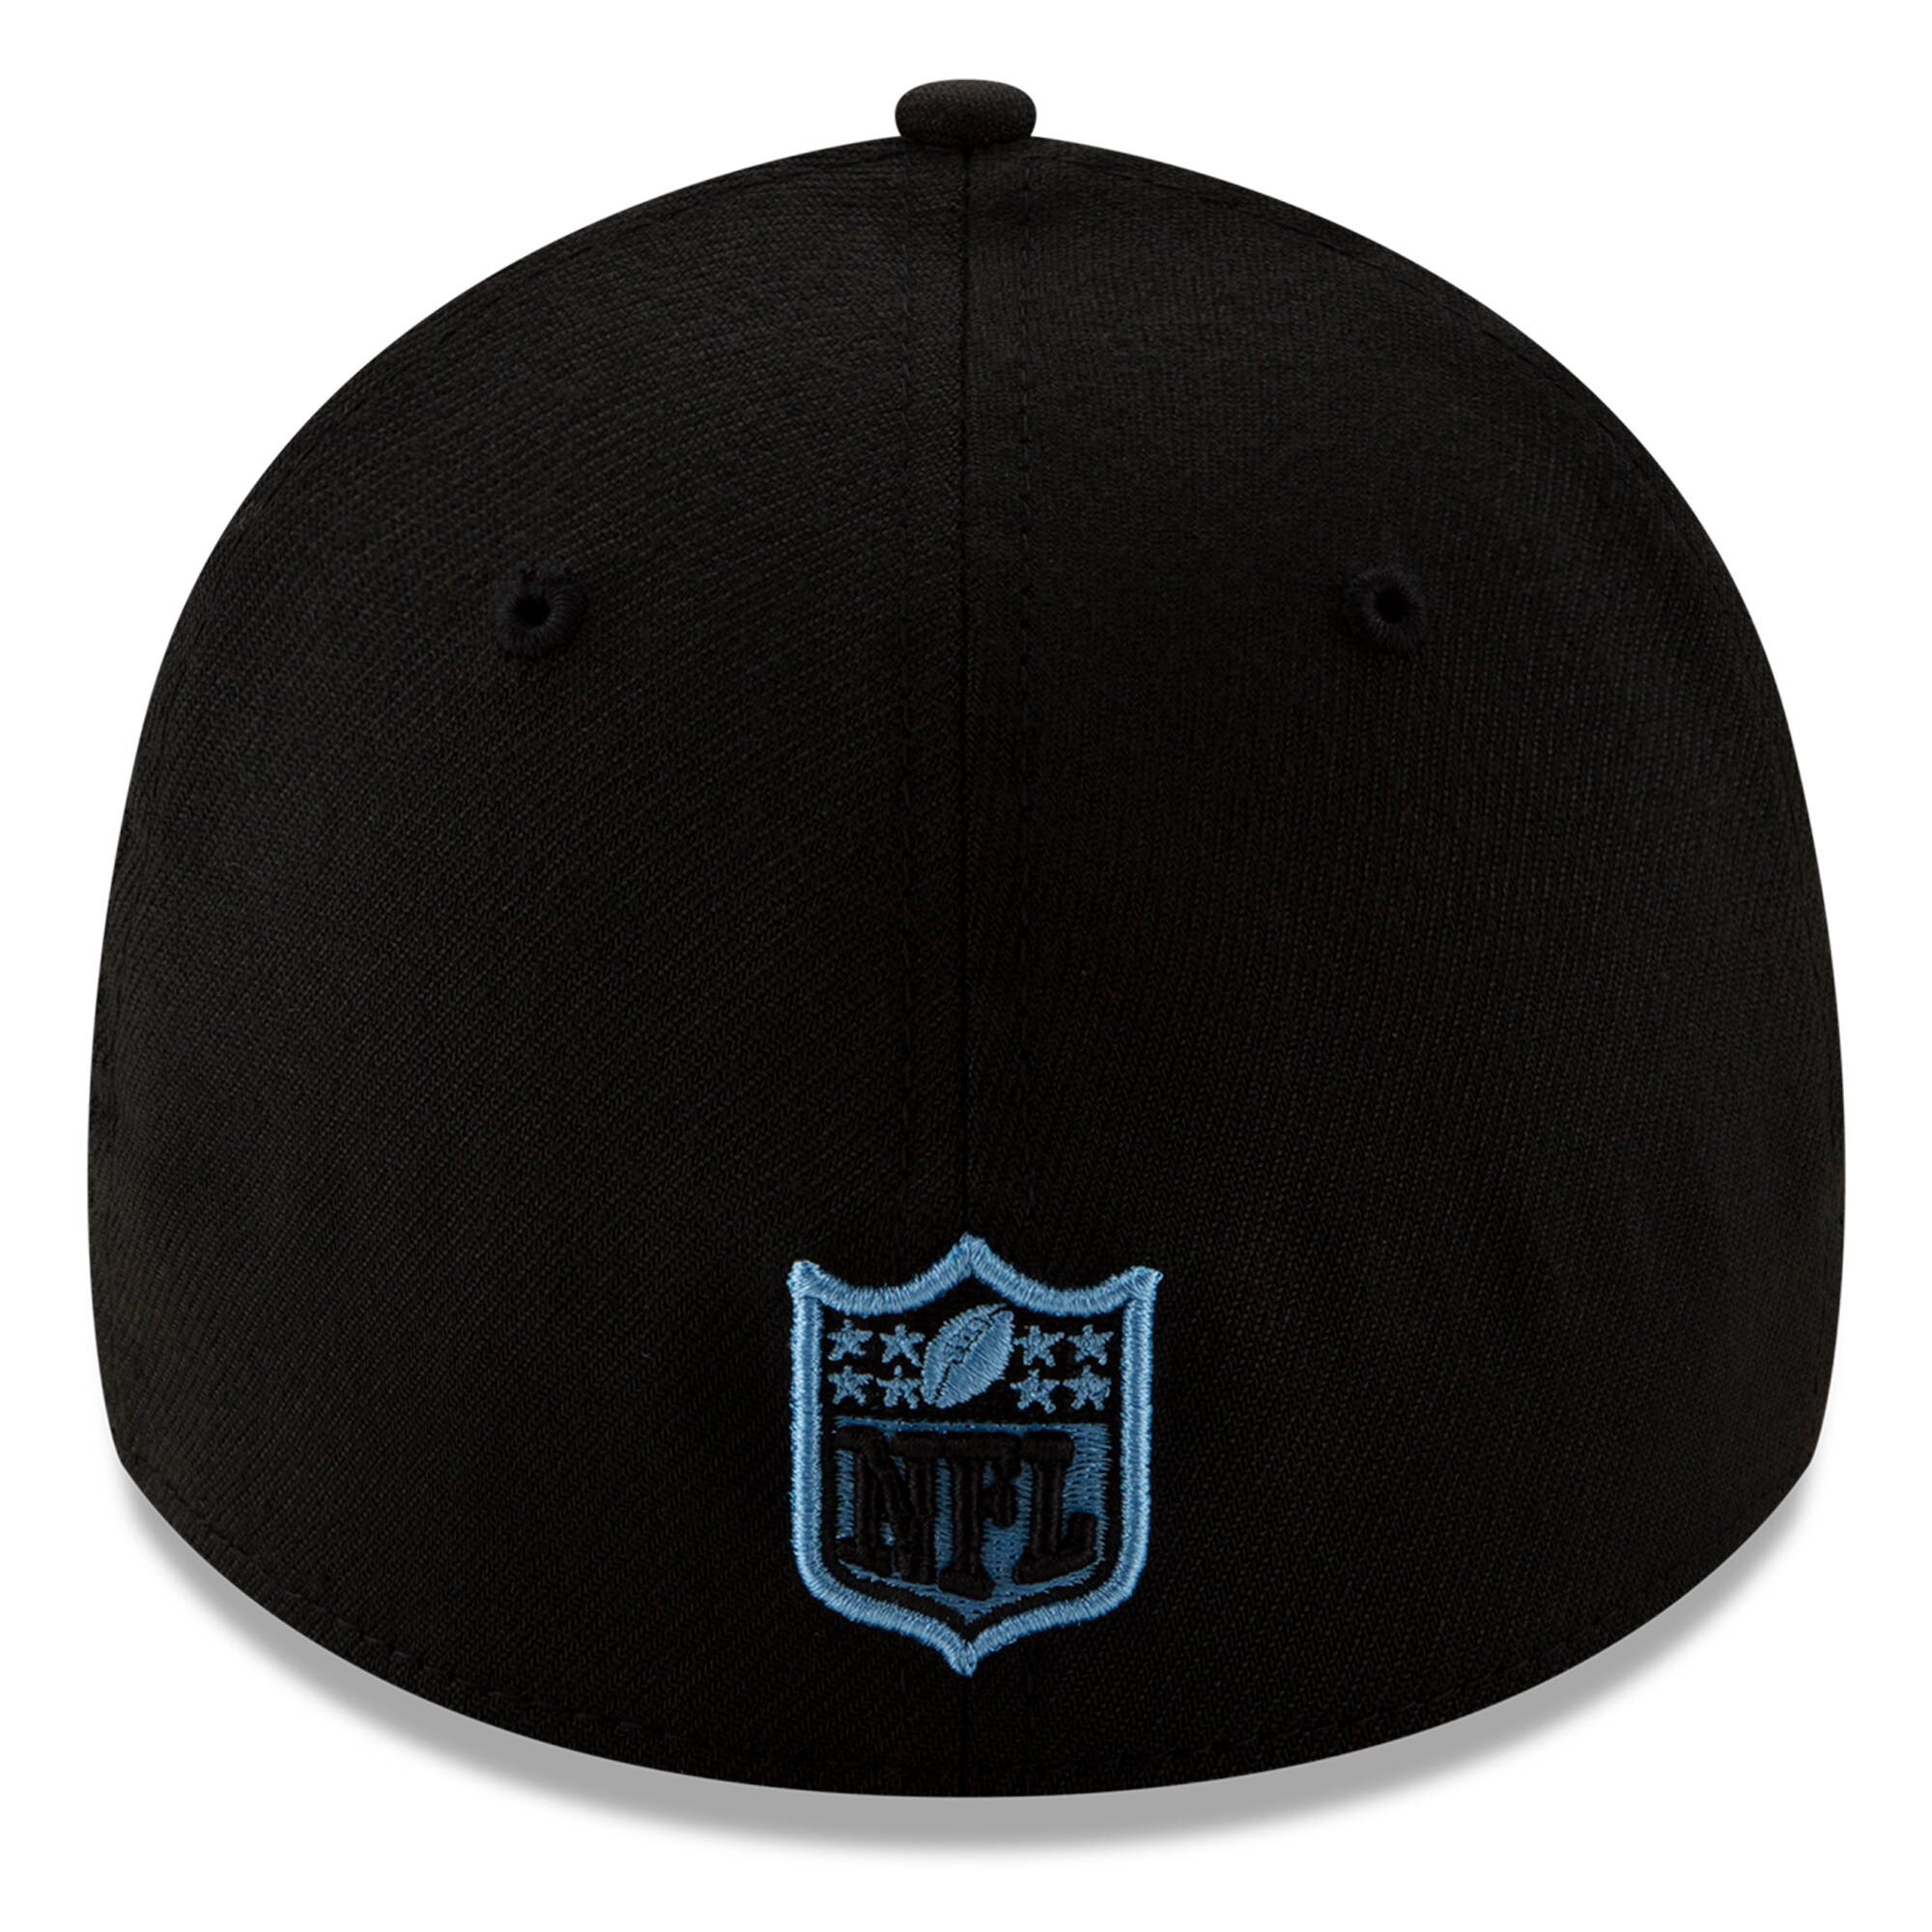 Tennessee Titans’ 2020 NFL Draft hat revealed